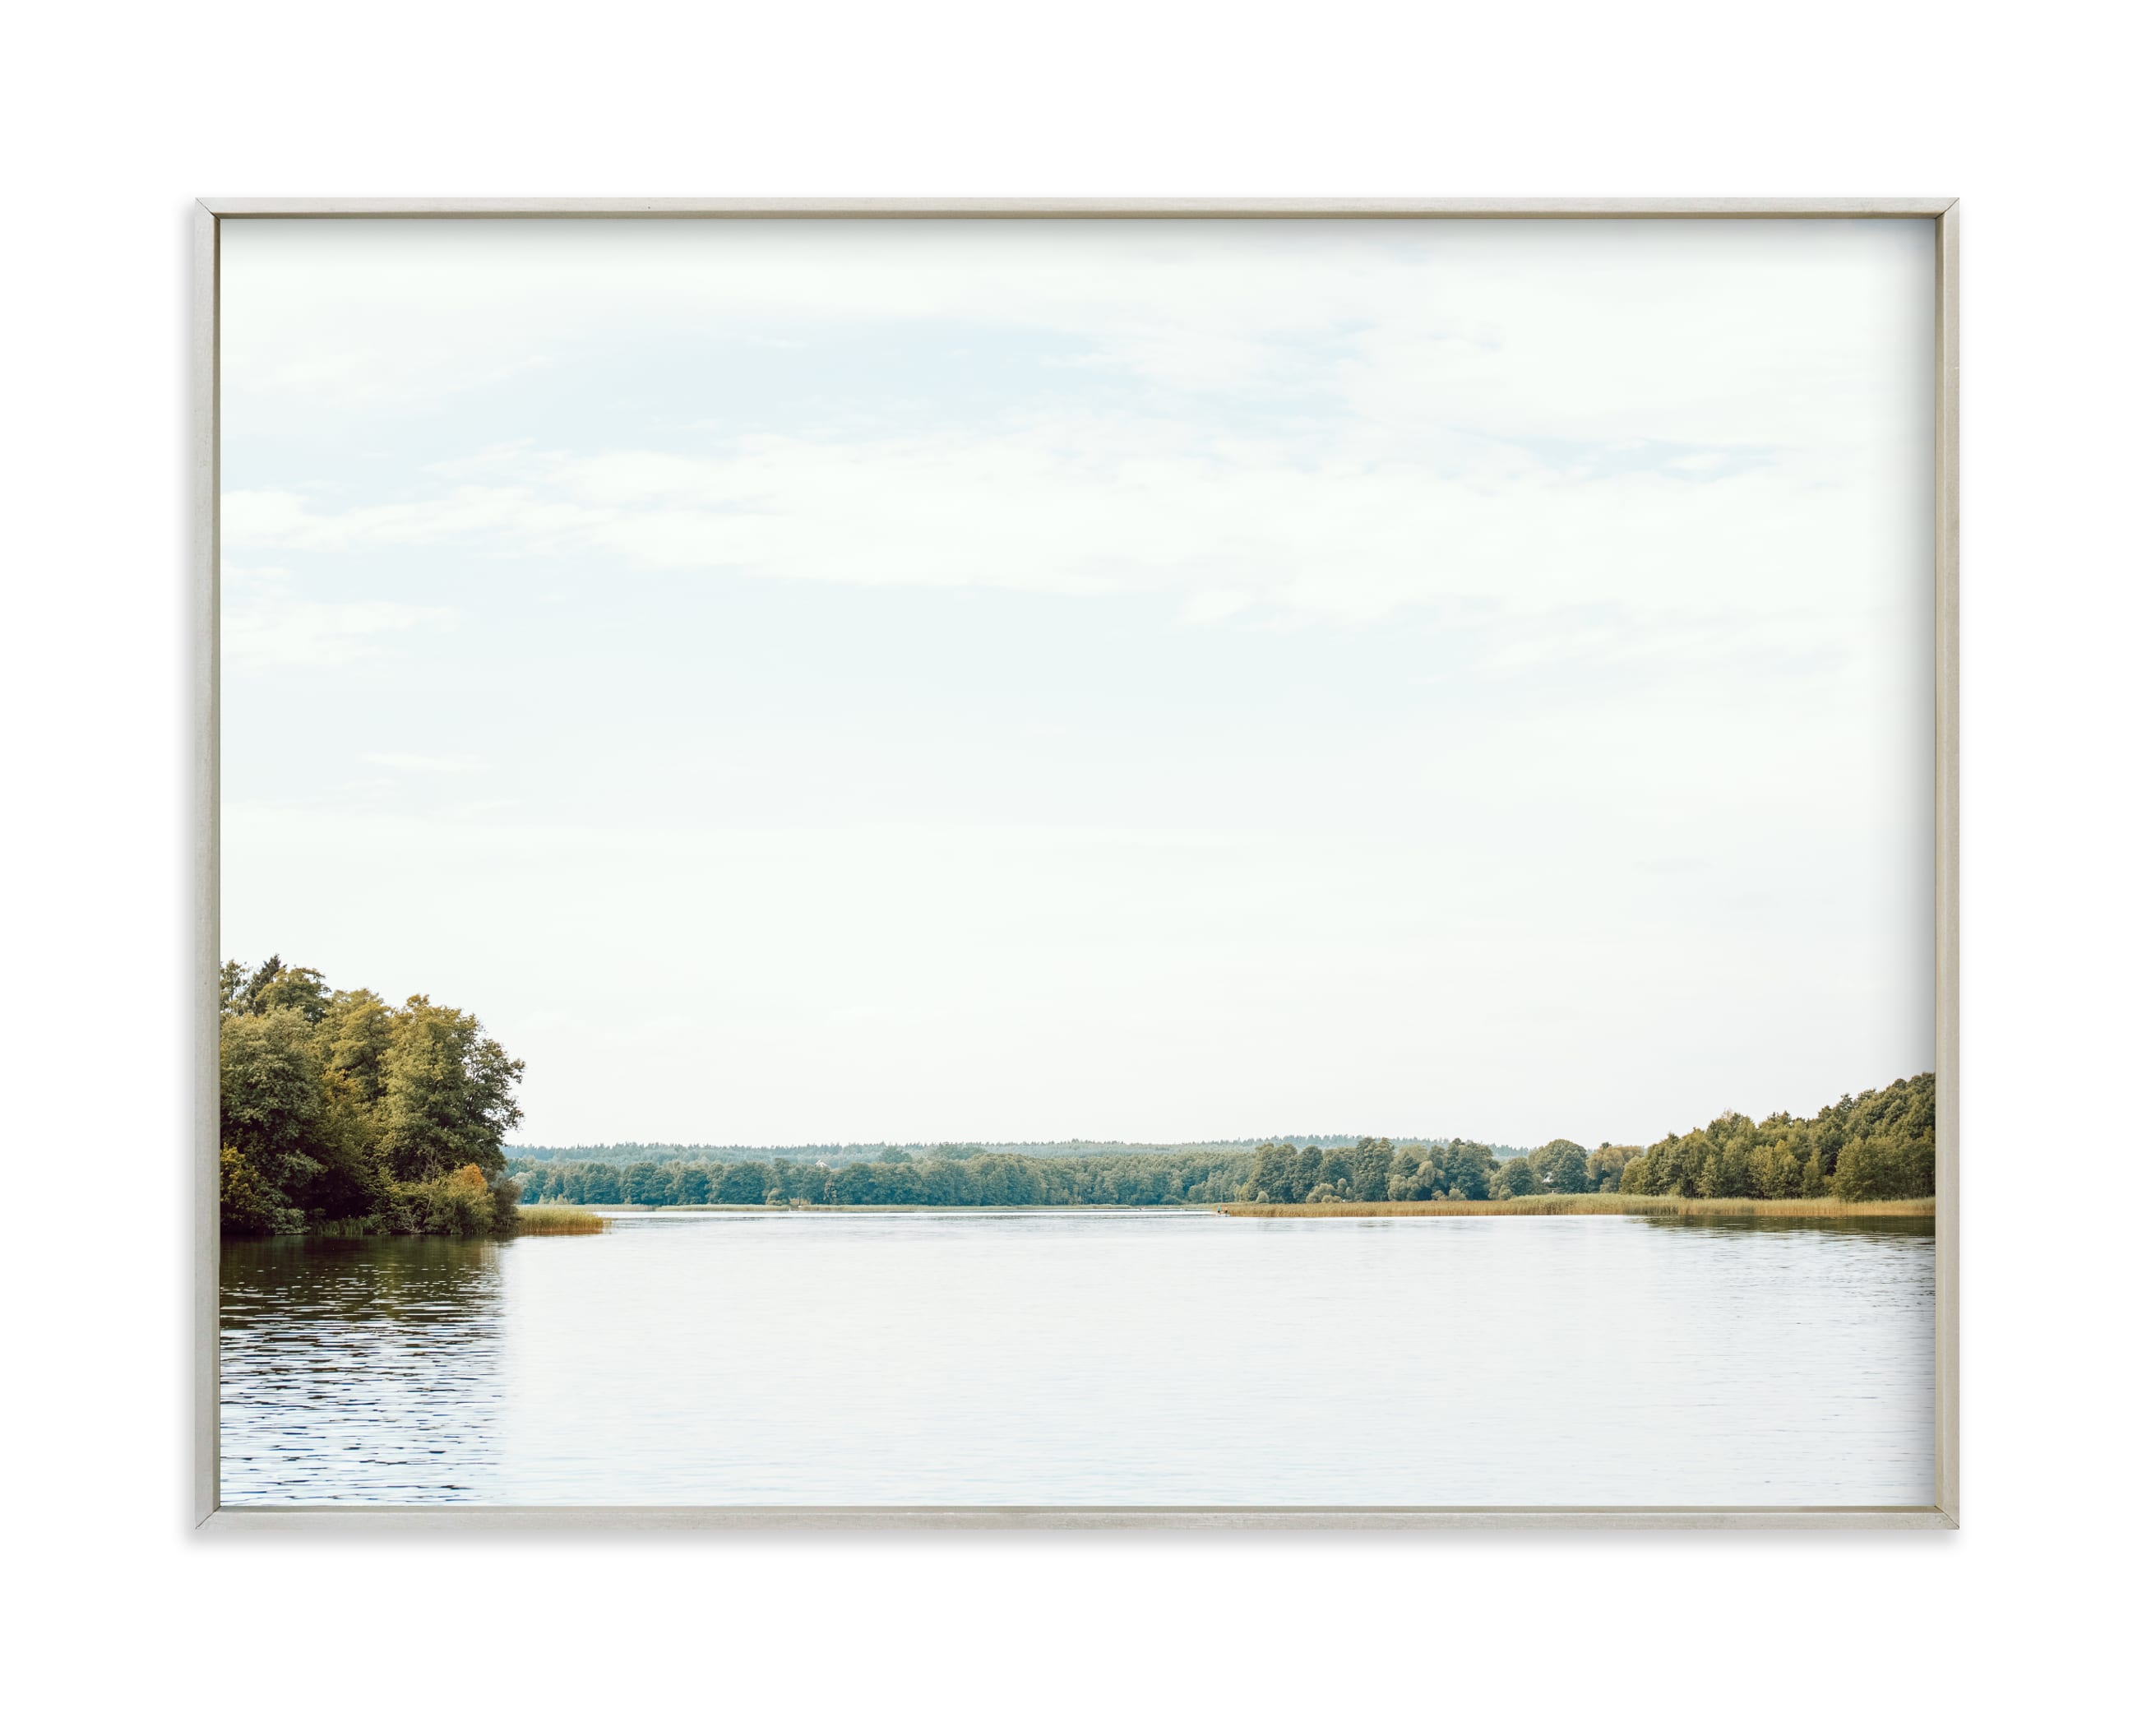 "Peaceful lake" by Lying on the grass in beautiful frame options and a variety of sizes.